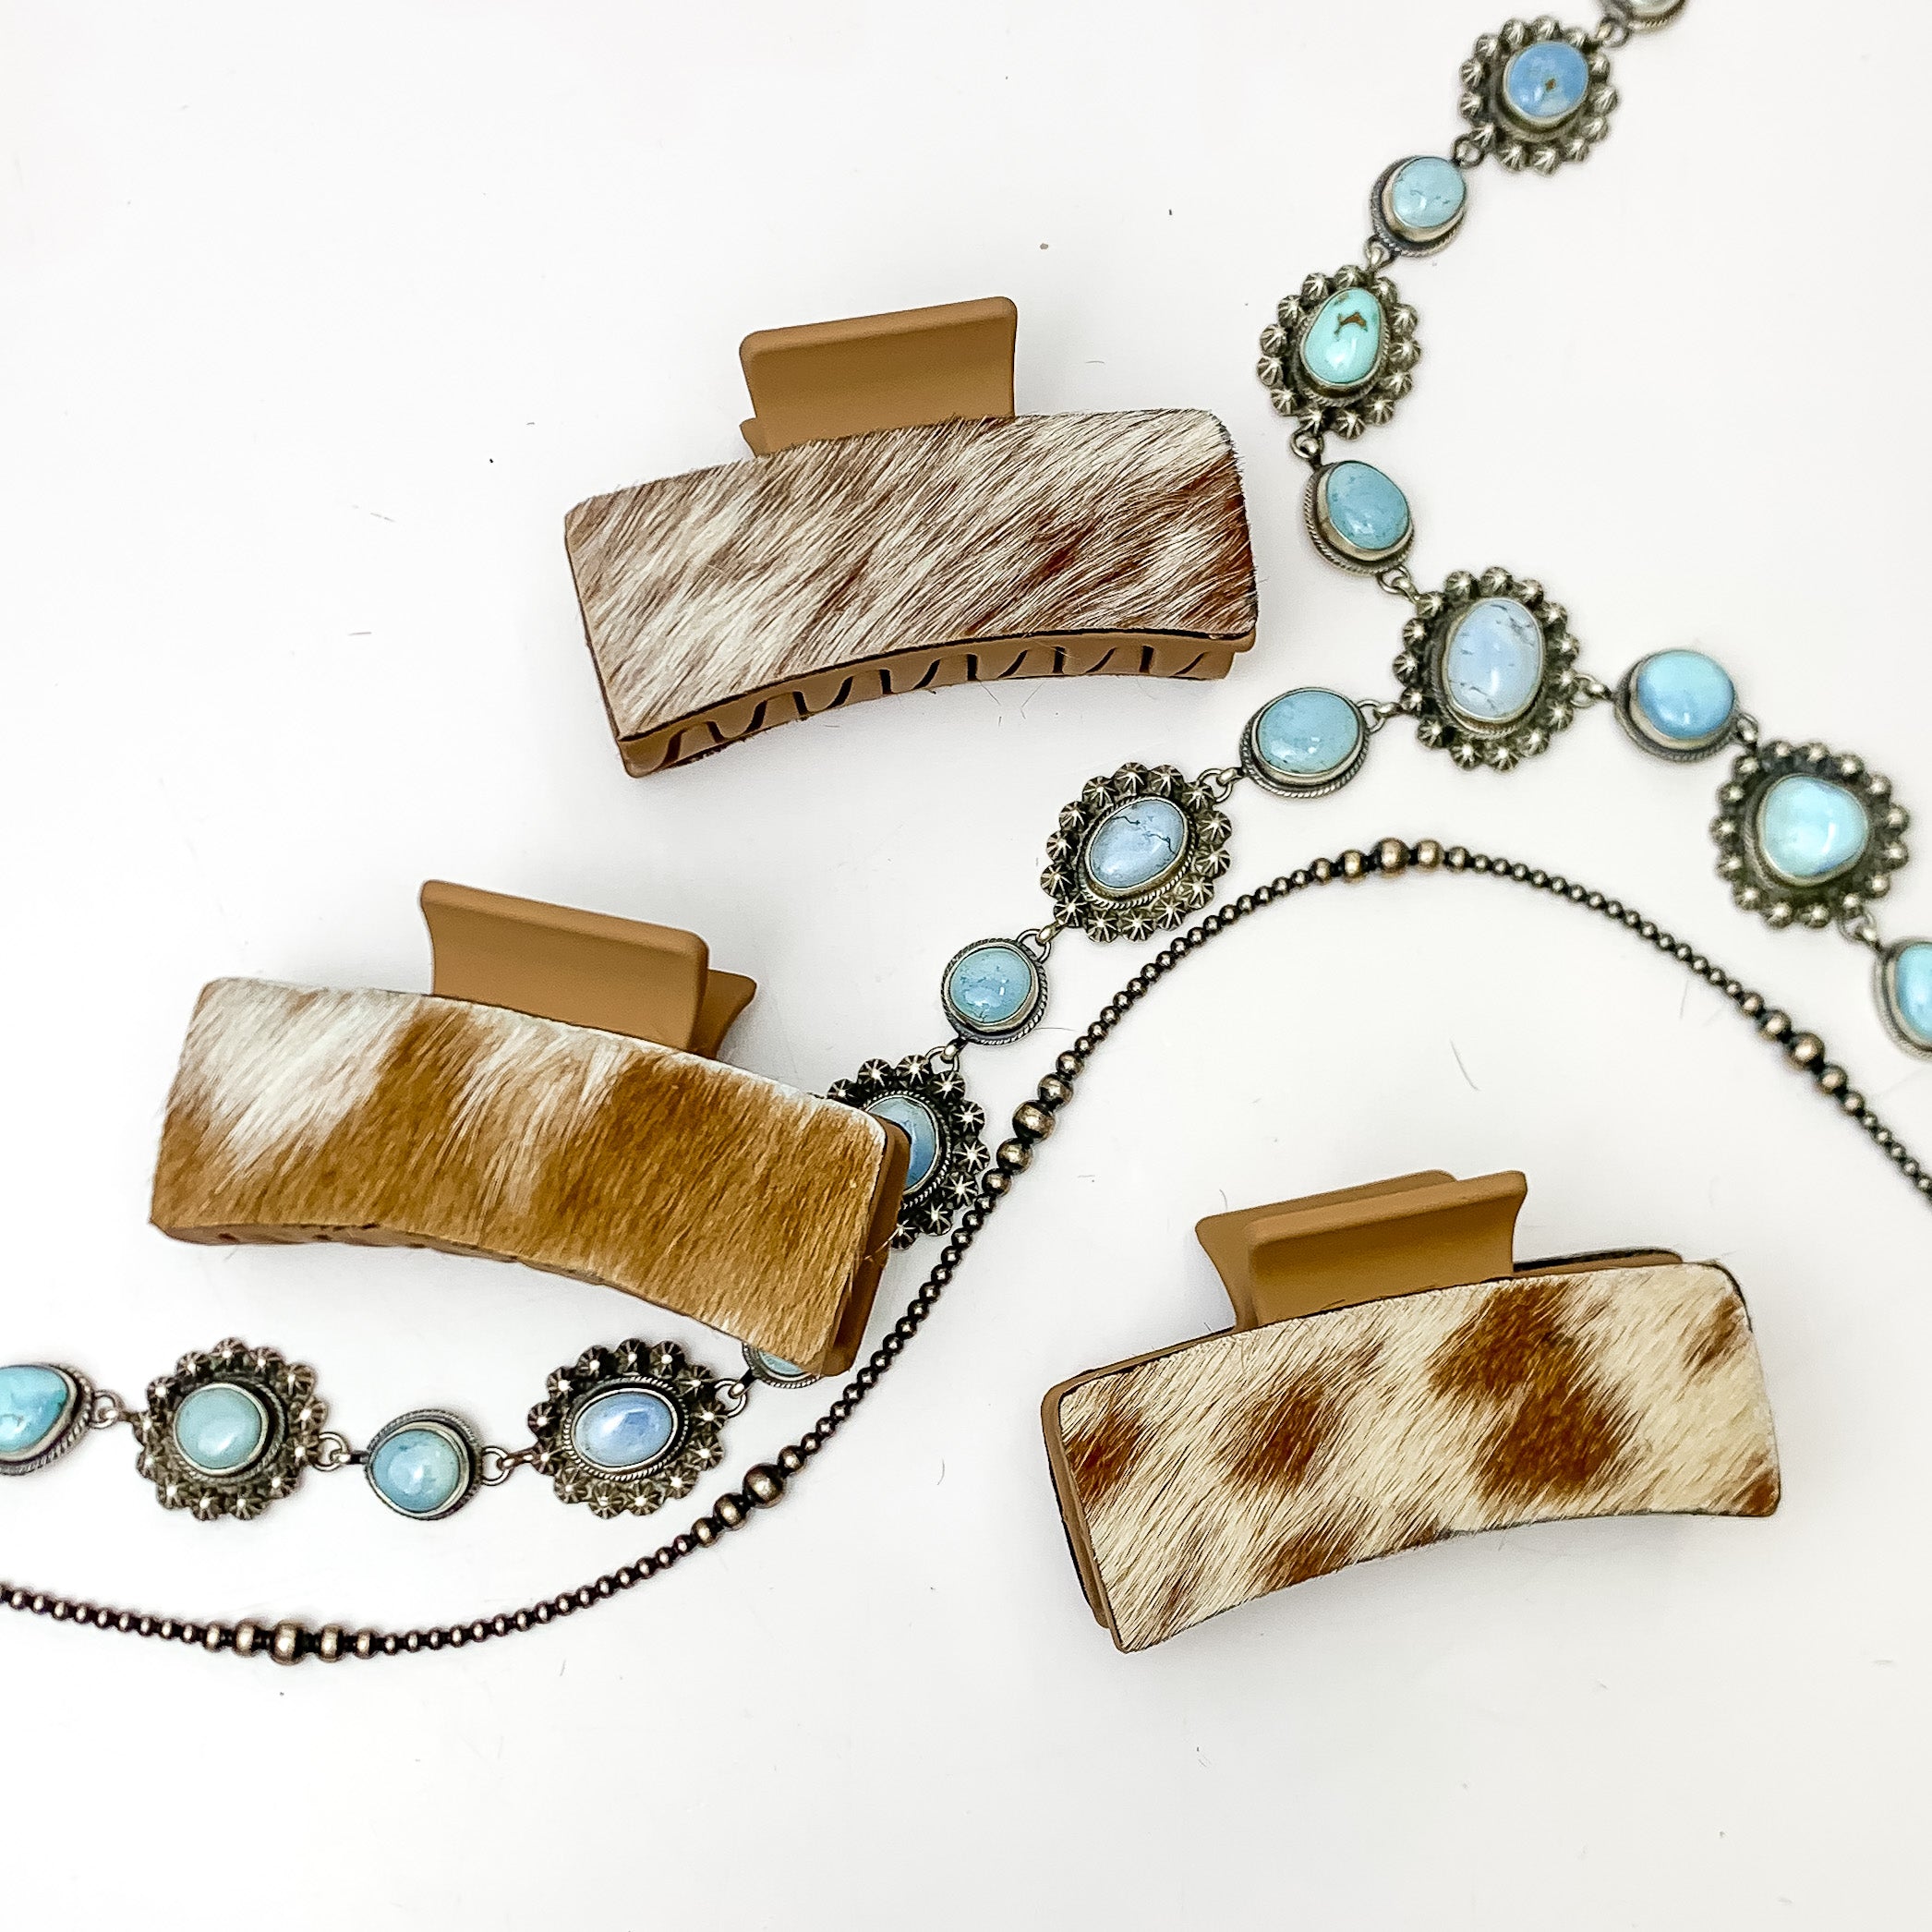 Pictured are three tan hair clips with ivory and tan mix hide patches. These earrings are pictured on a white background with silver necklaces under the clips. 